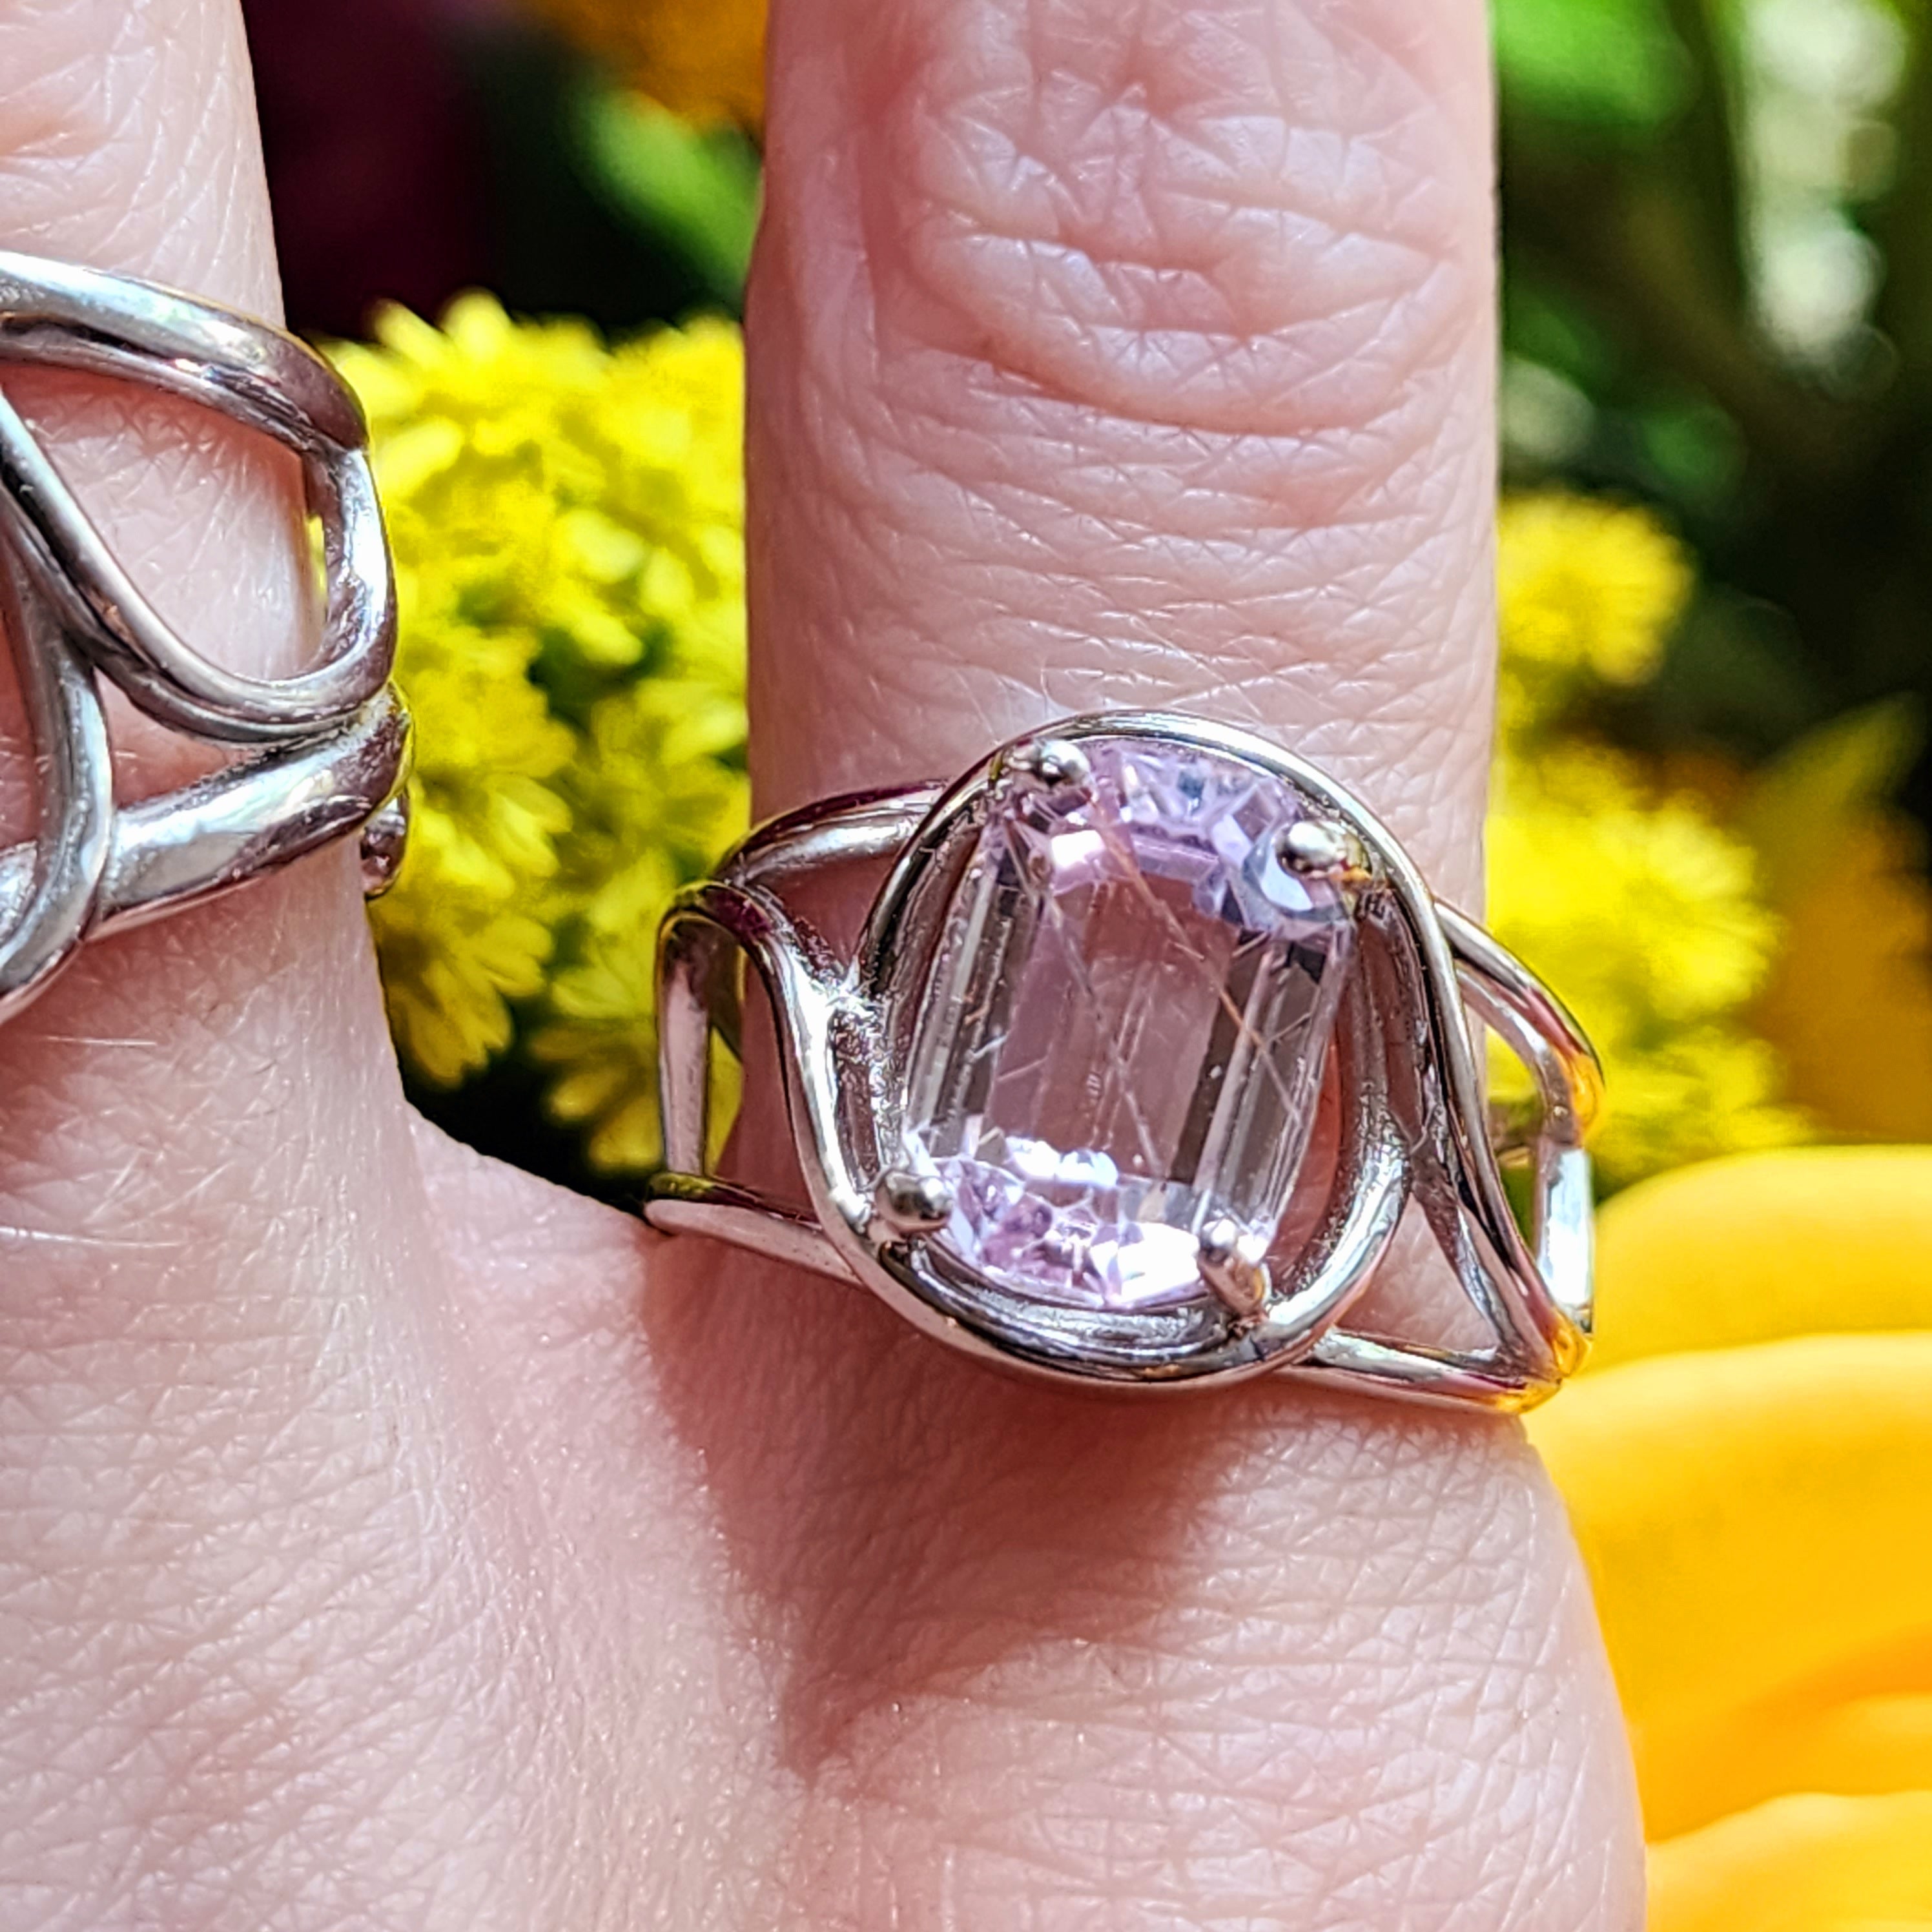 Kunzite with Silver Rutile Finger Cuff Adjustable Ring .925 Silver (High Quality) for Emotional Healing, Joy and Love